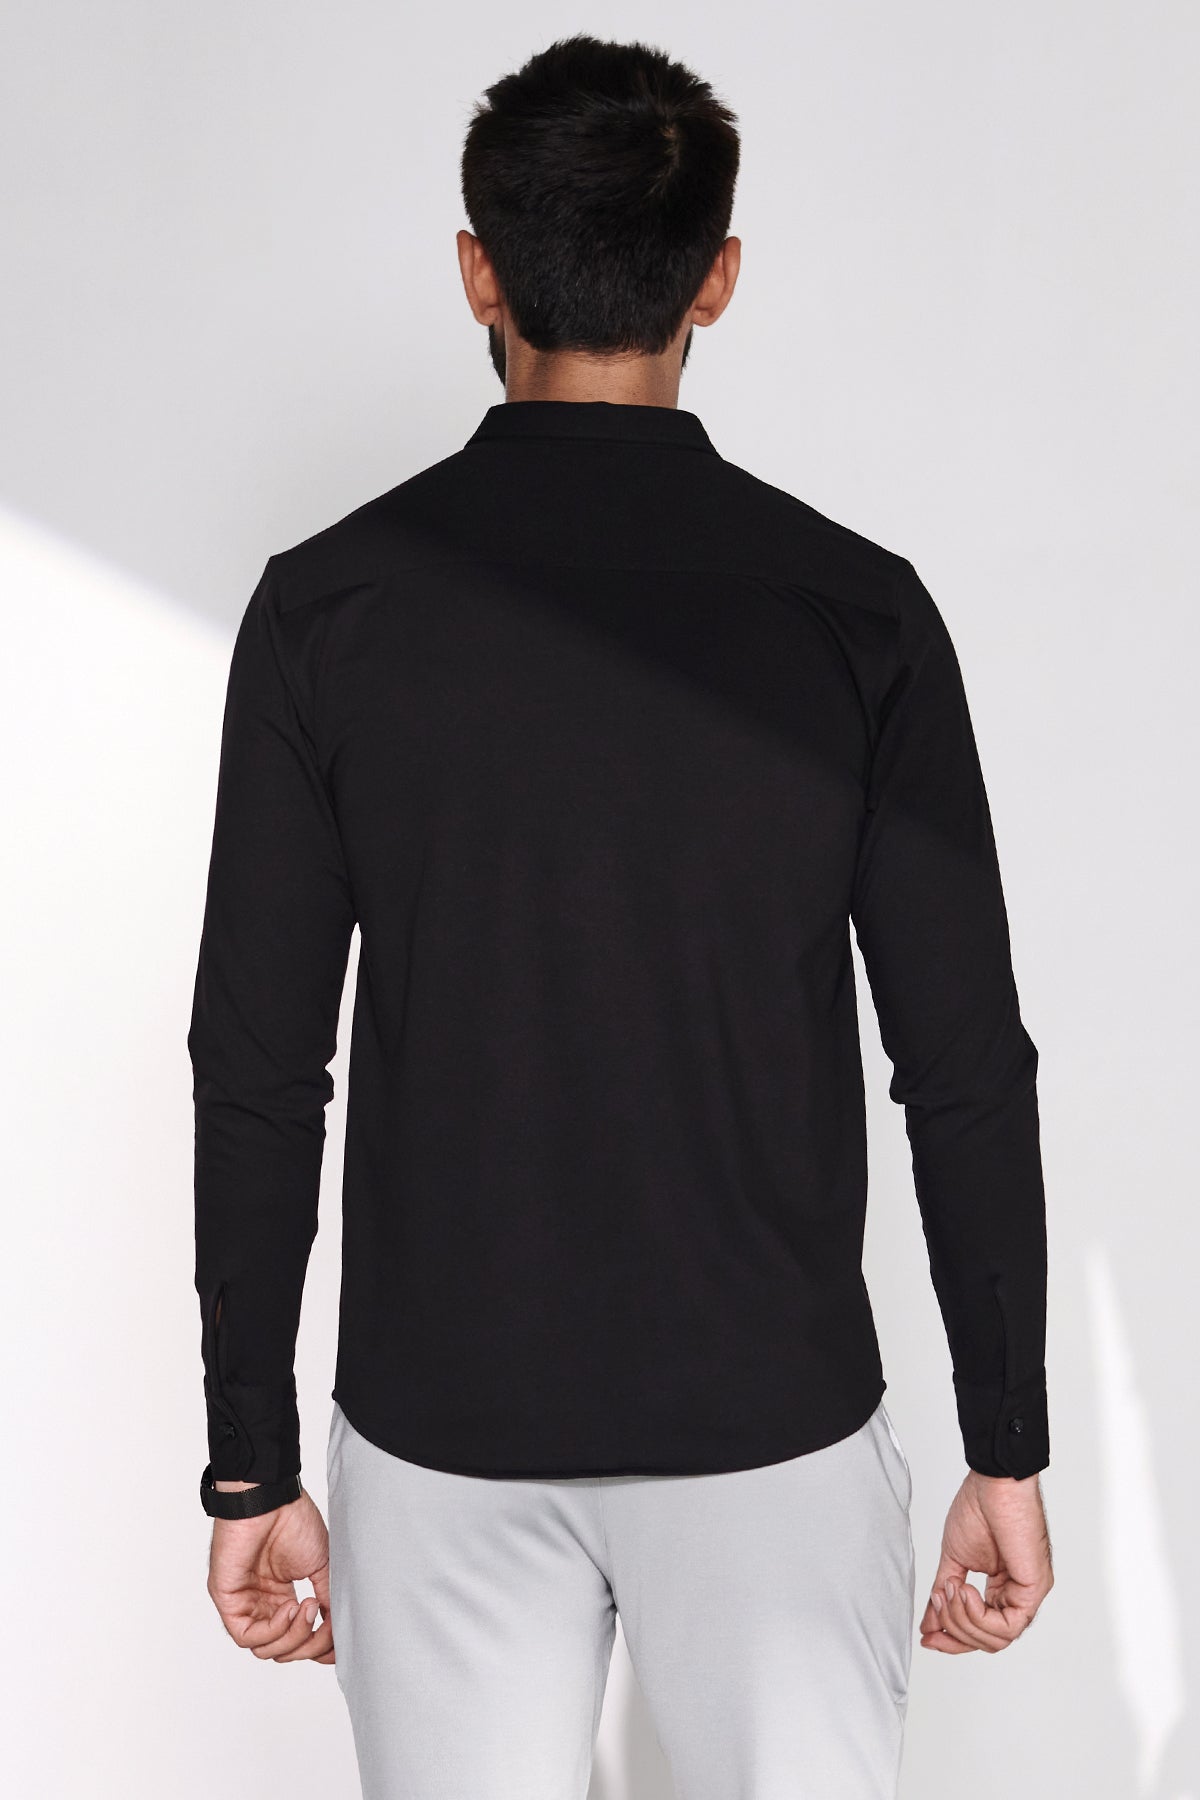 The Black Full Sleeve Knit Shirt Beyours Essentials Private Limited